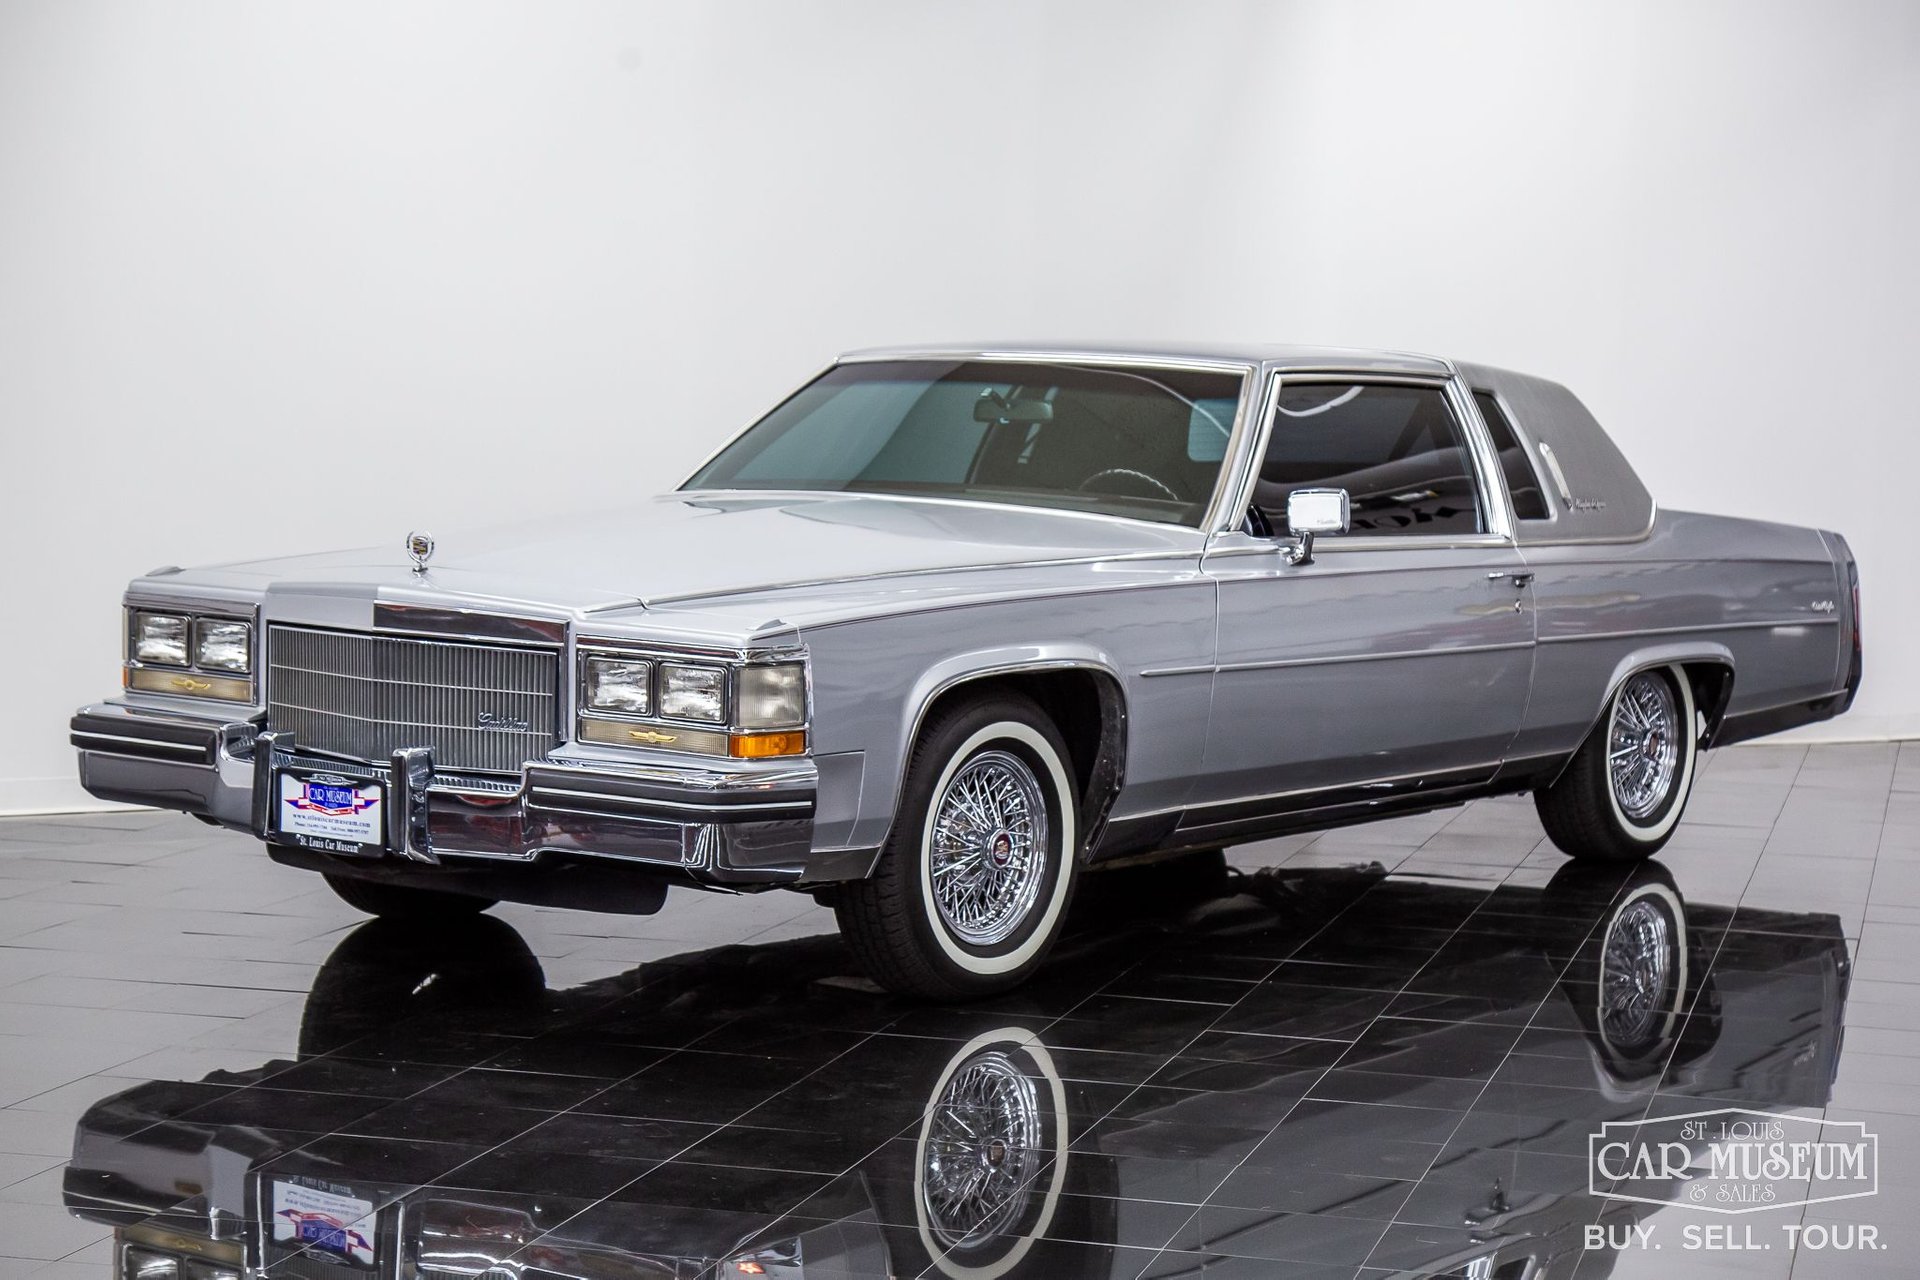 1985 Cadillac Fleetwood For Sale | St. Louis Car Museum